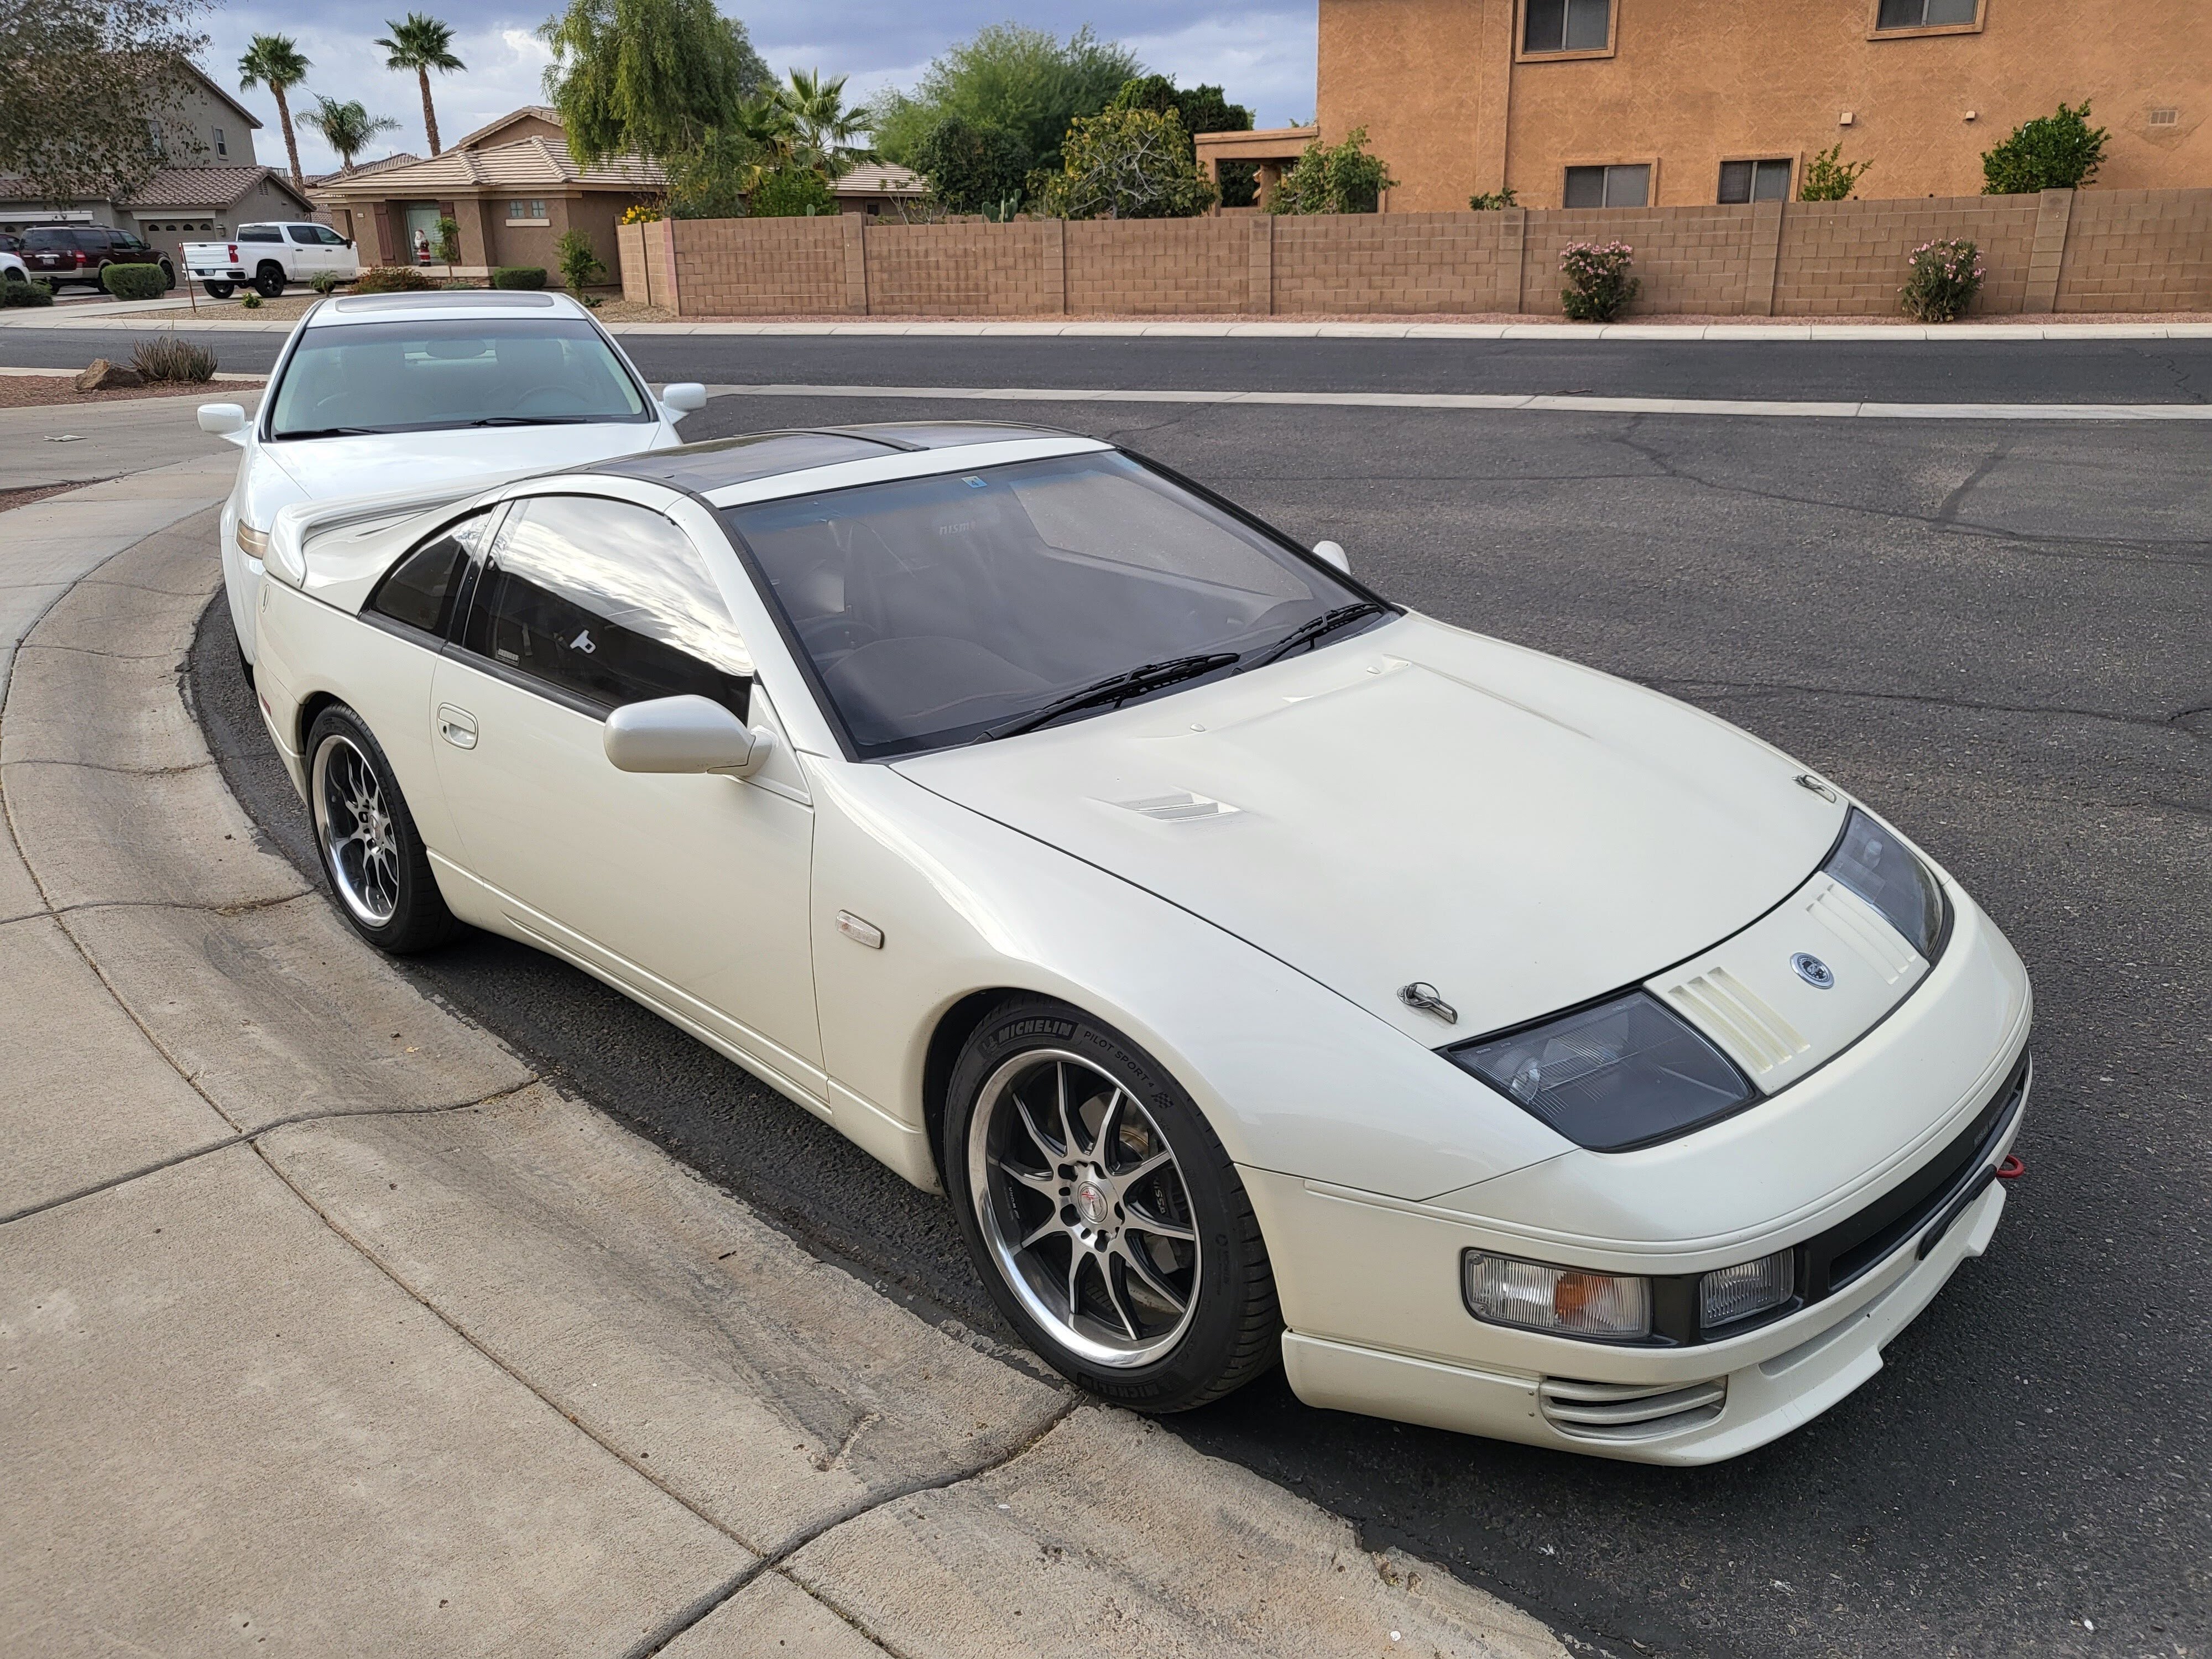 Nissan 300ZX Classic Cars for Sale - Classics on Autotrader